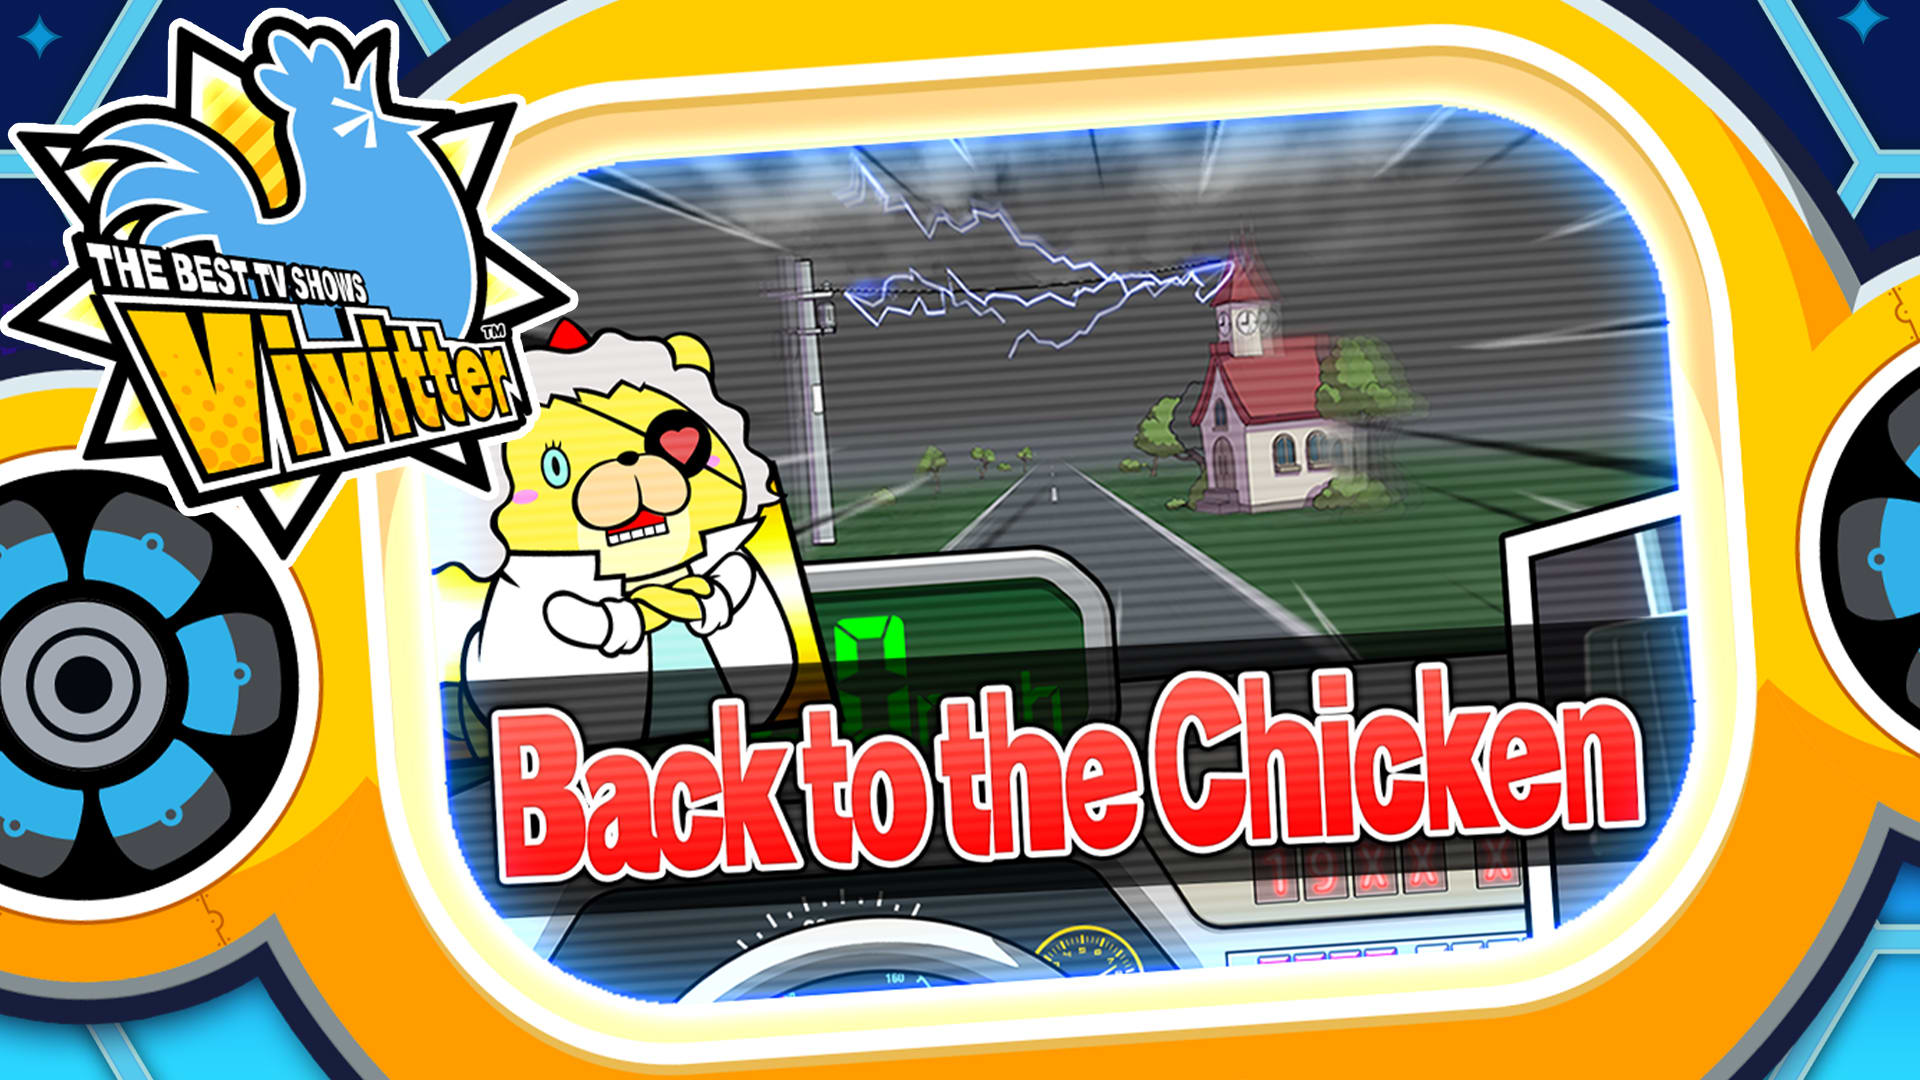 Additional mini-game "Back to the Chicken"